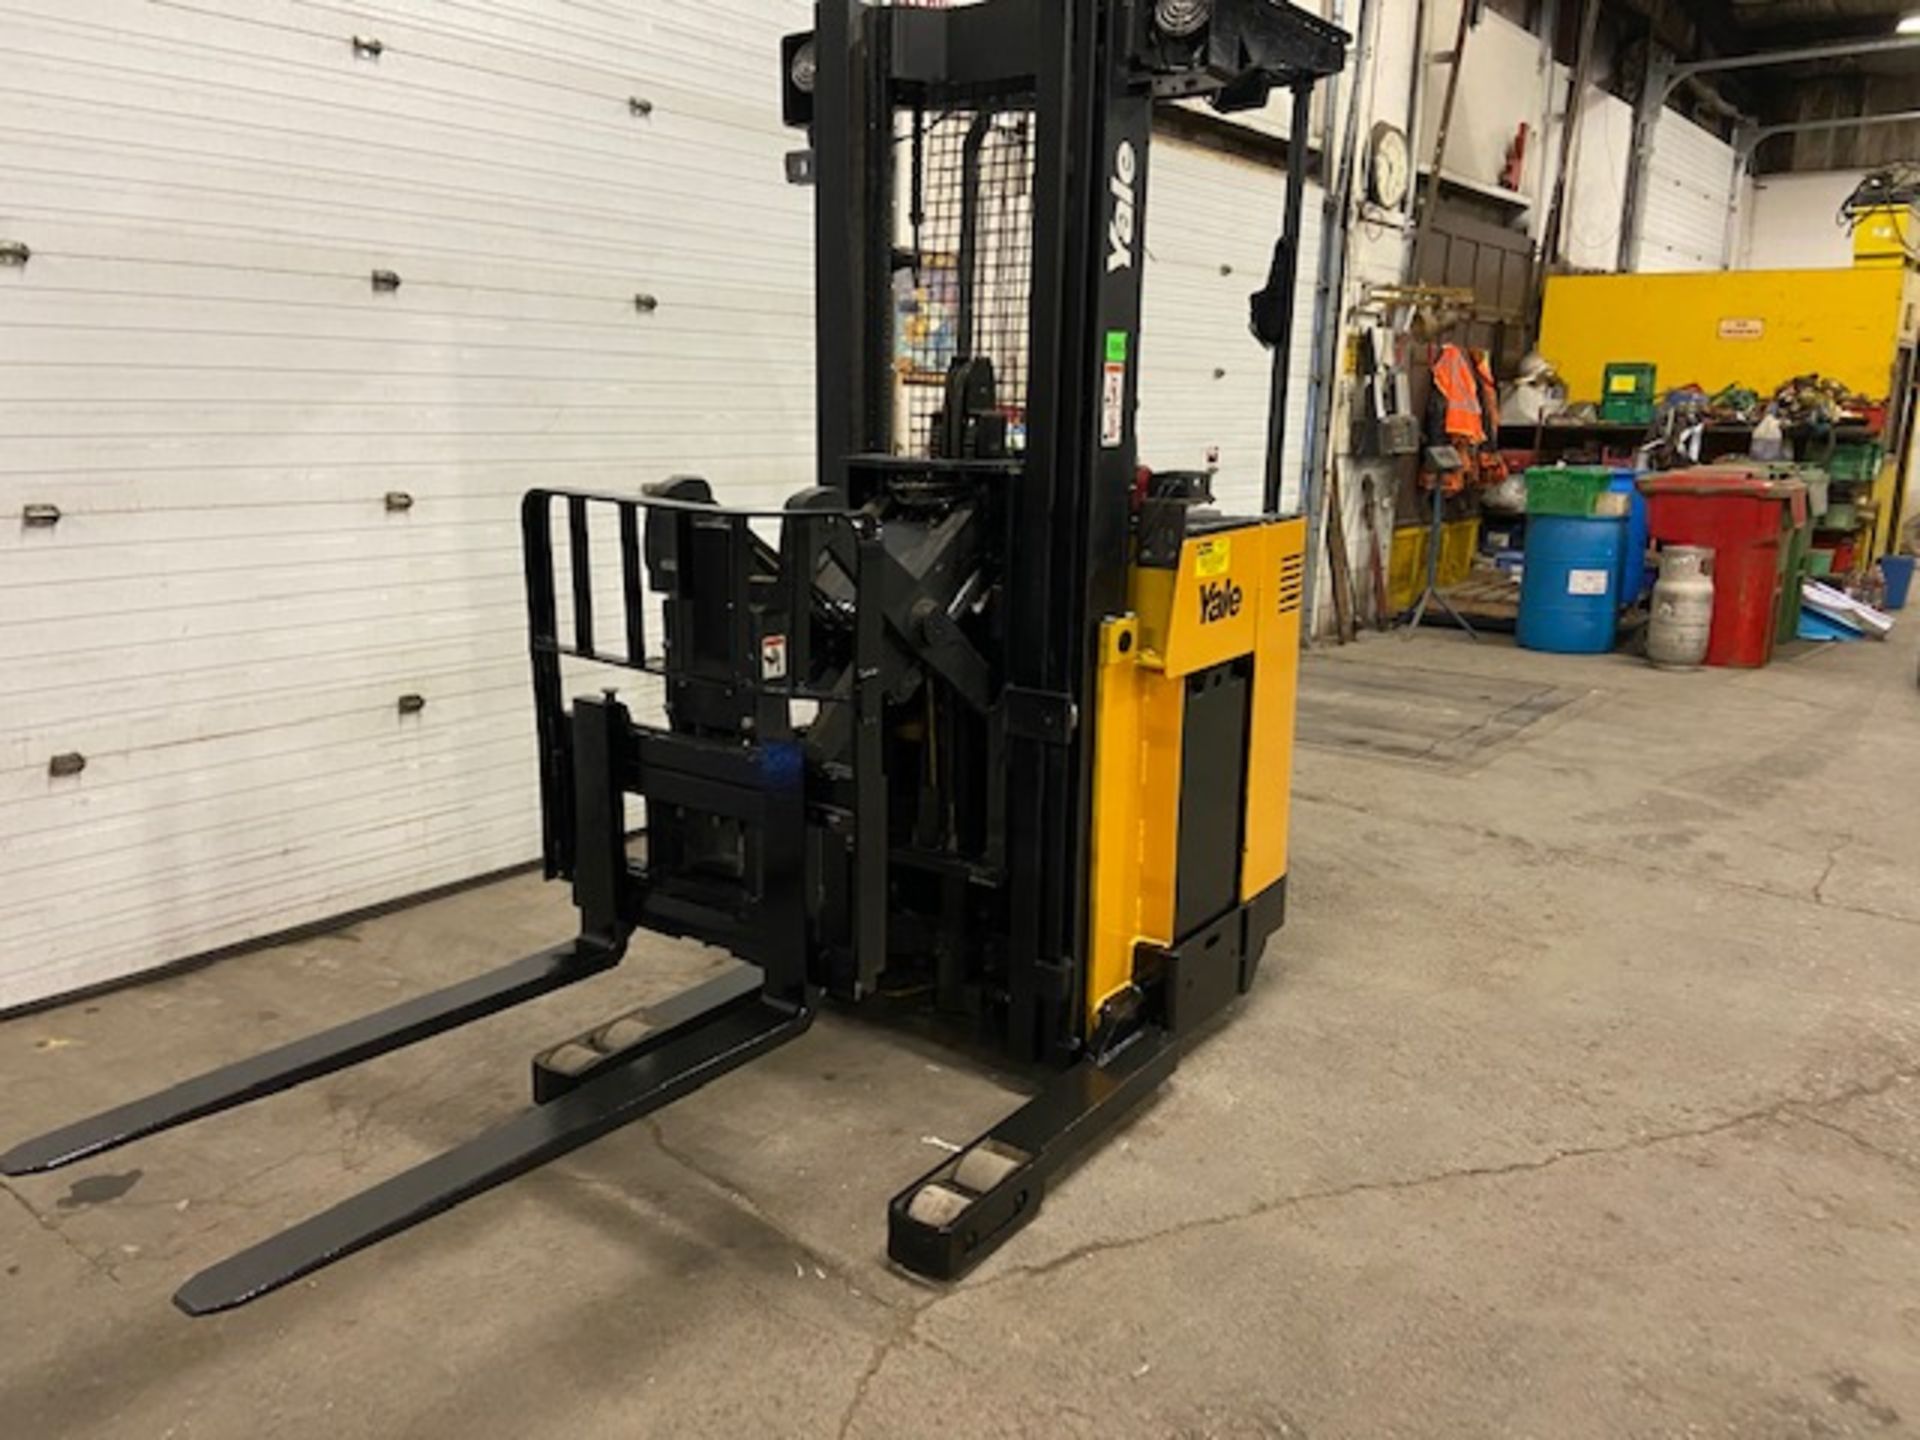 FREE CUSTOMS - Yale Reach Truck Pallet Lifter REACH TRUCK electric 3500lbs with 3-stage mast - Image 2 of 3